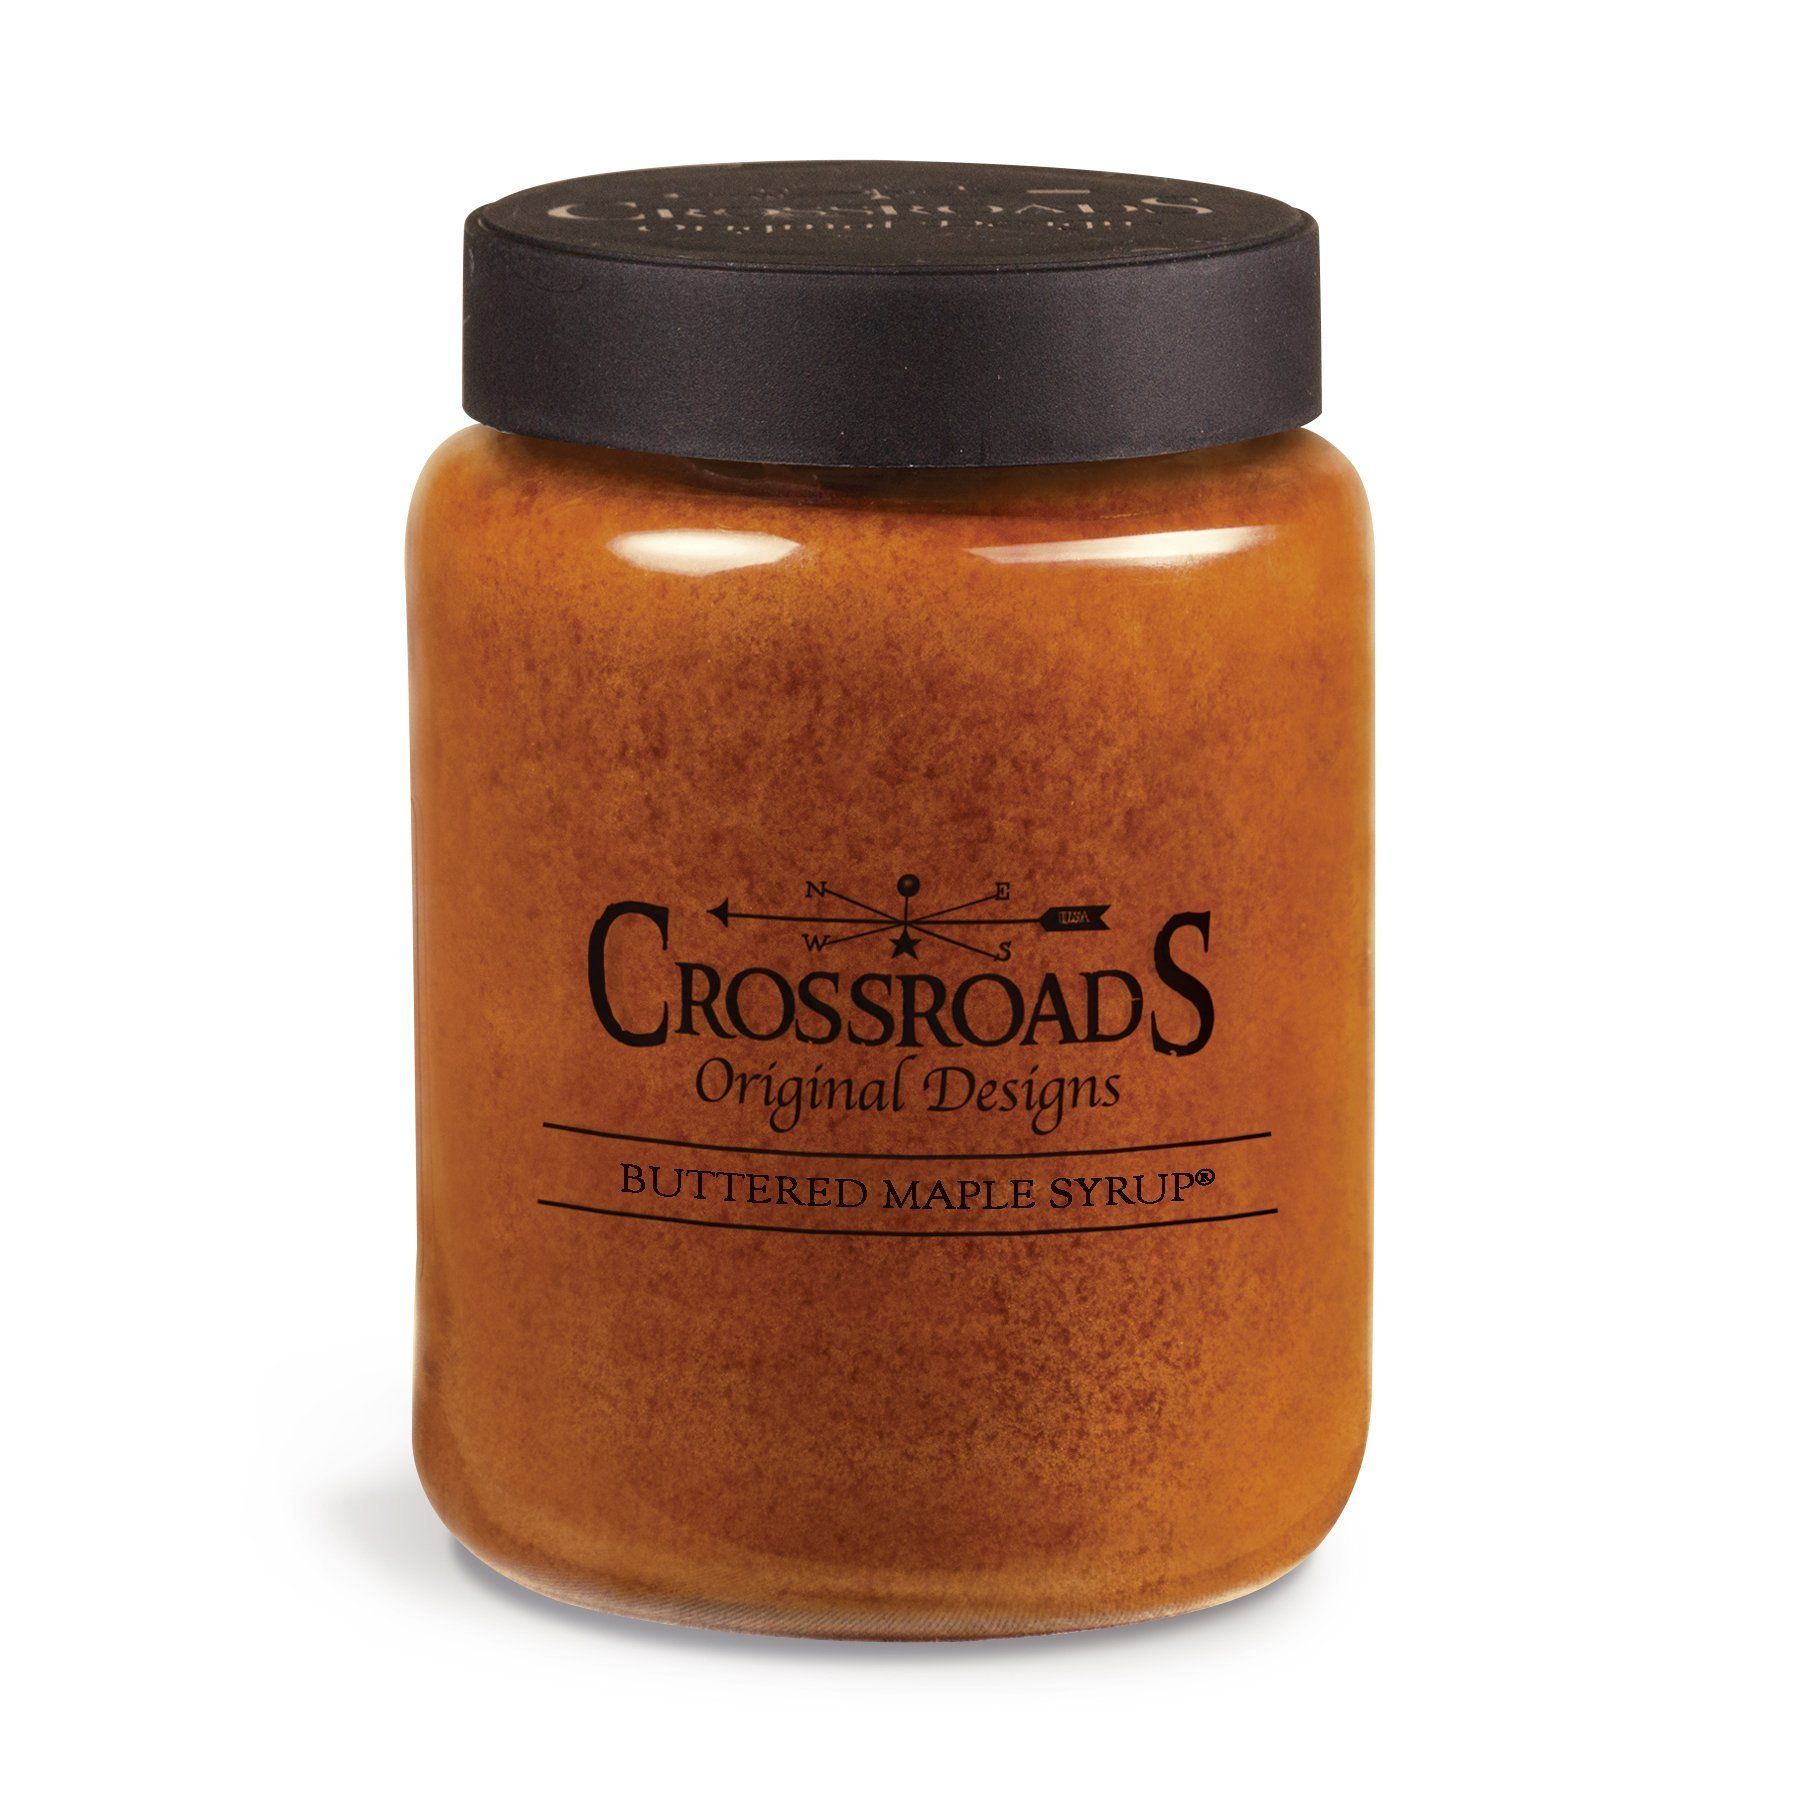 Crossroads Buttered Maple Syrup Scented 2-Wick Candle, 26 Ounce | Amazon (US)